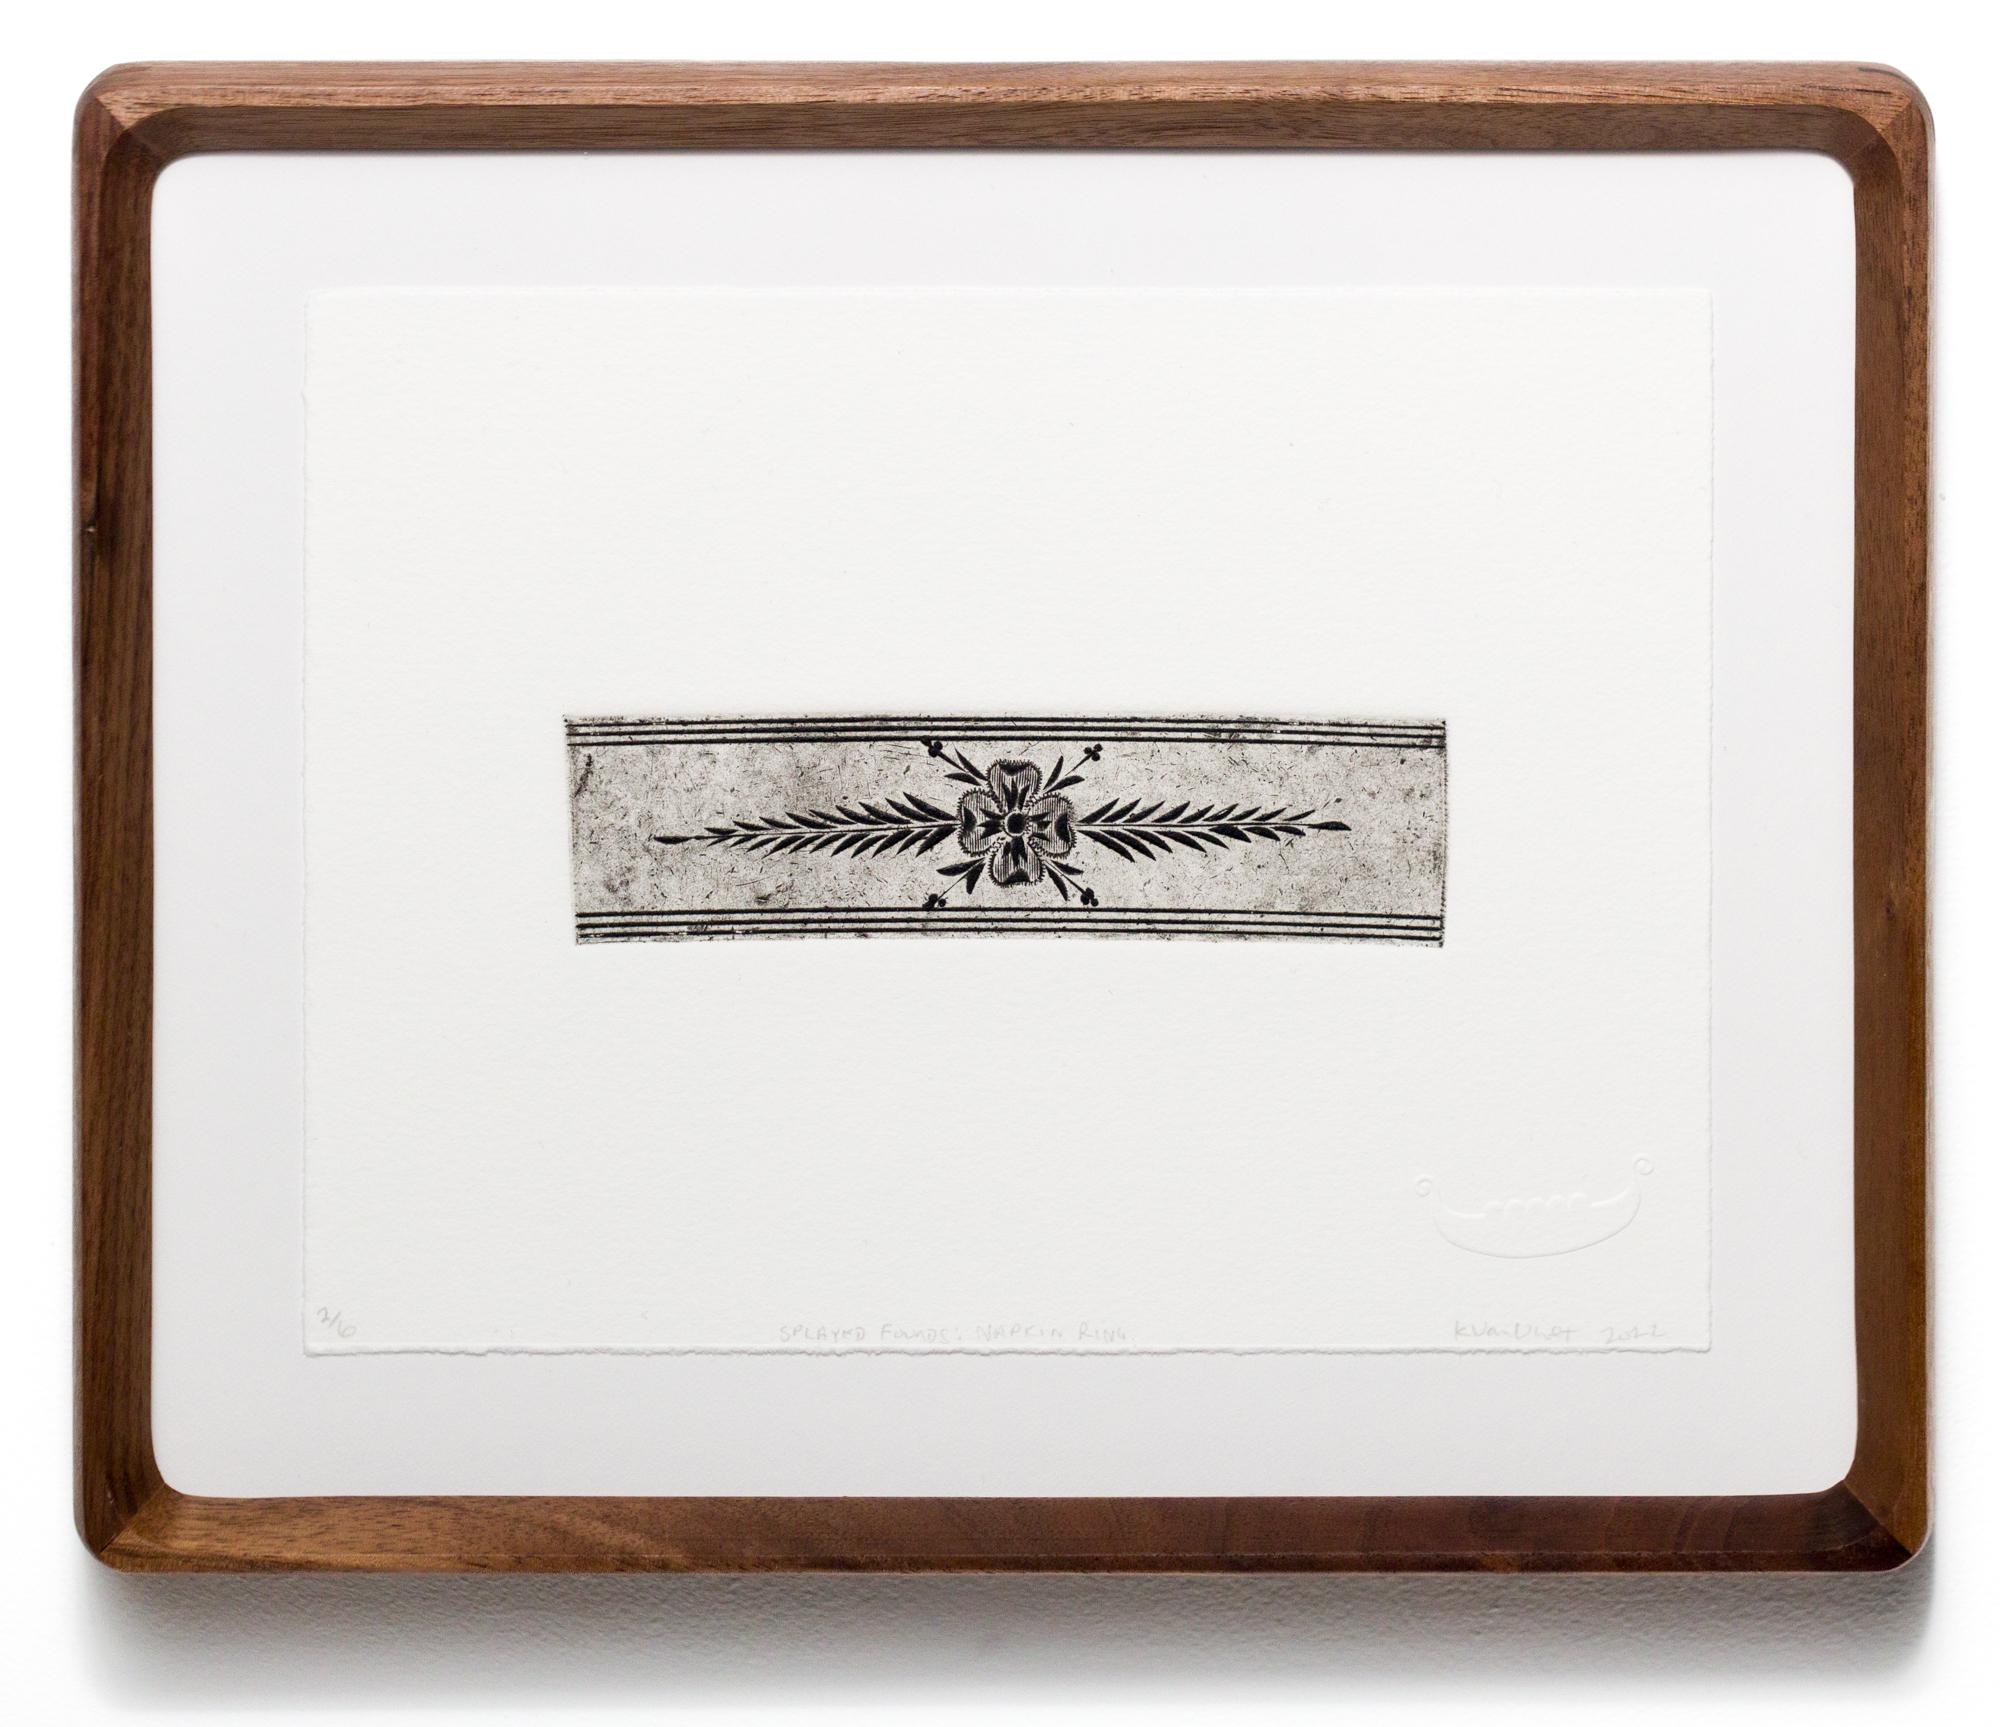 "Splayed Founds: Napkin Ring", Intaglio Print, Representation of Common Objects